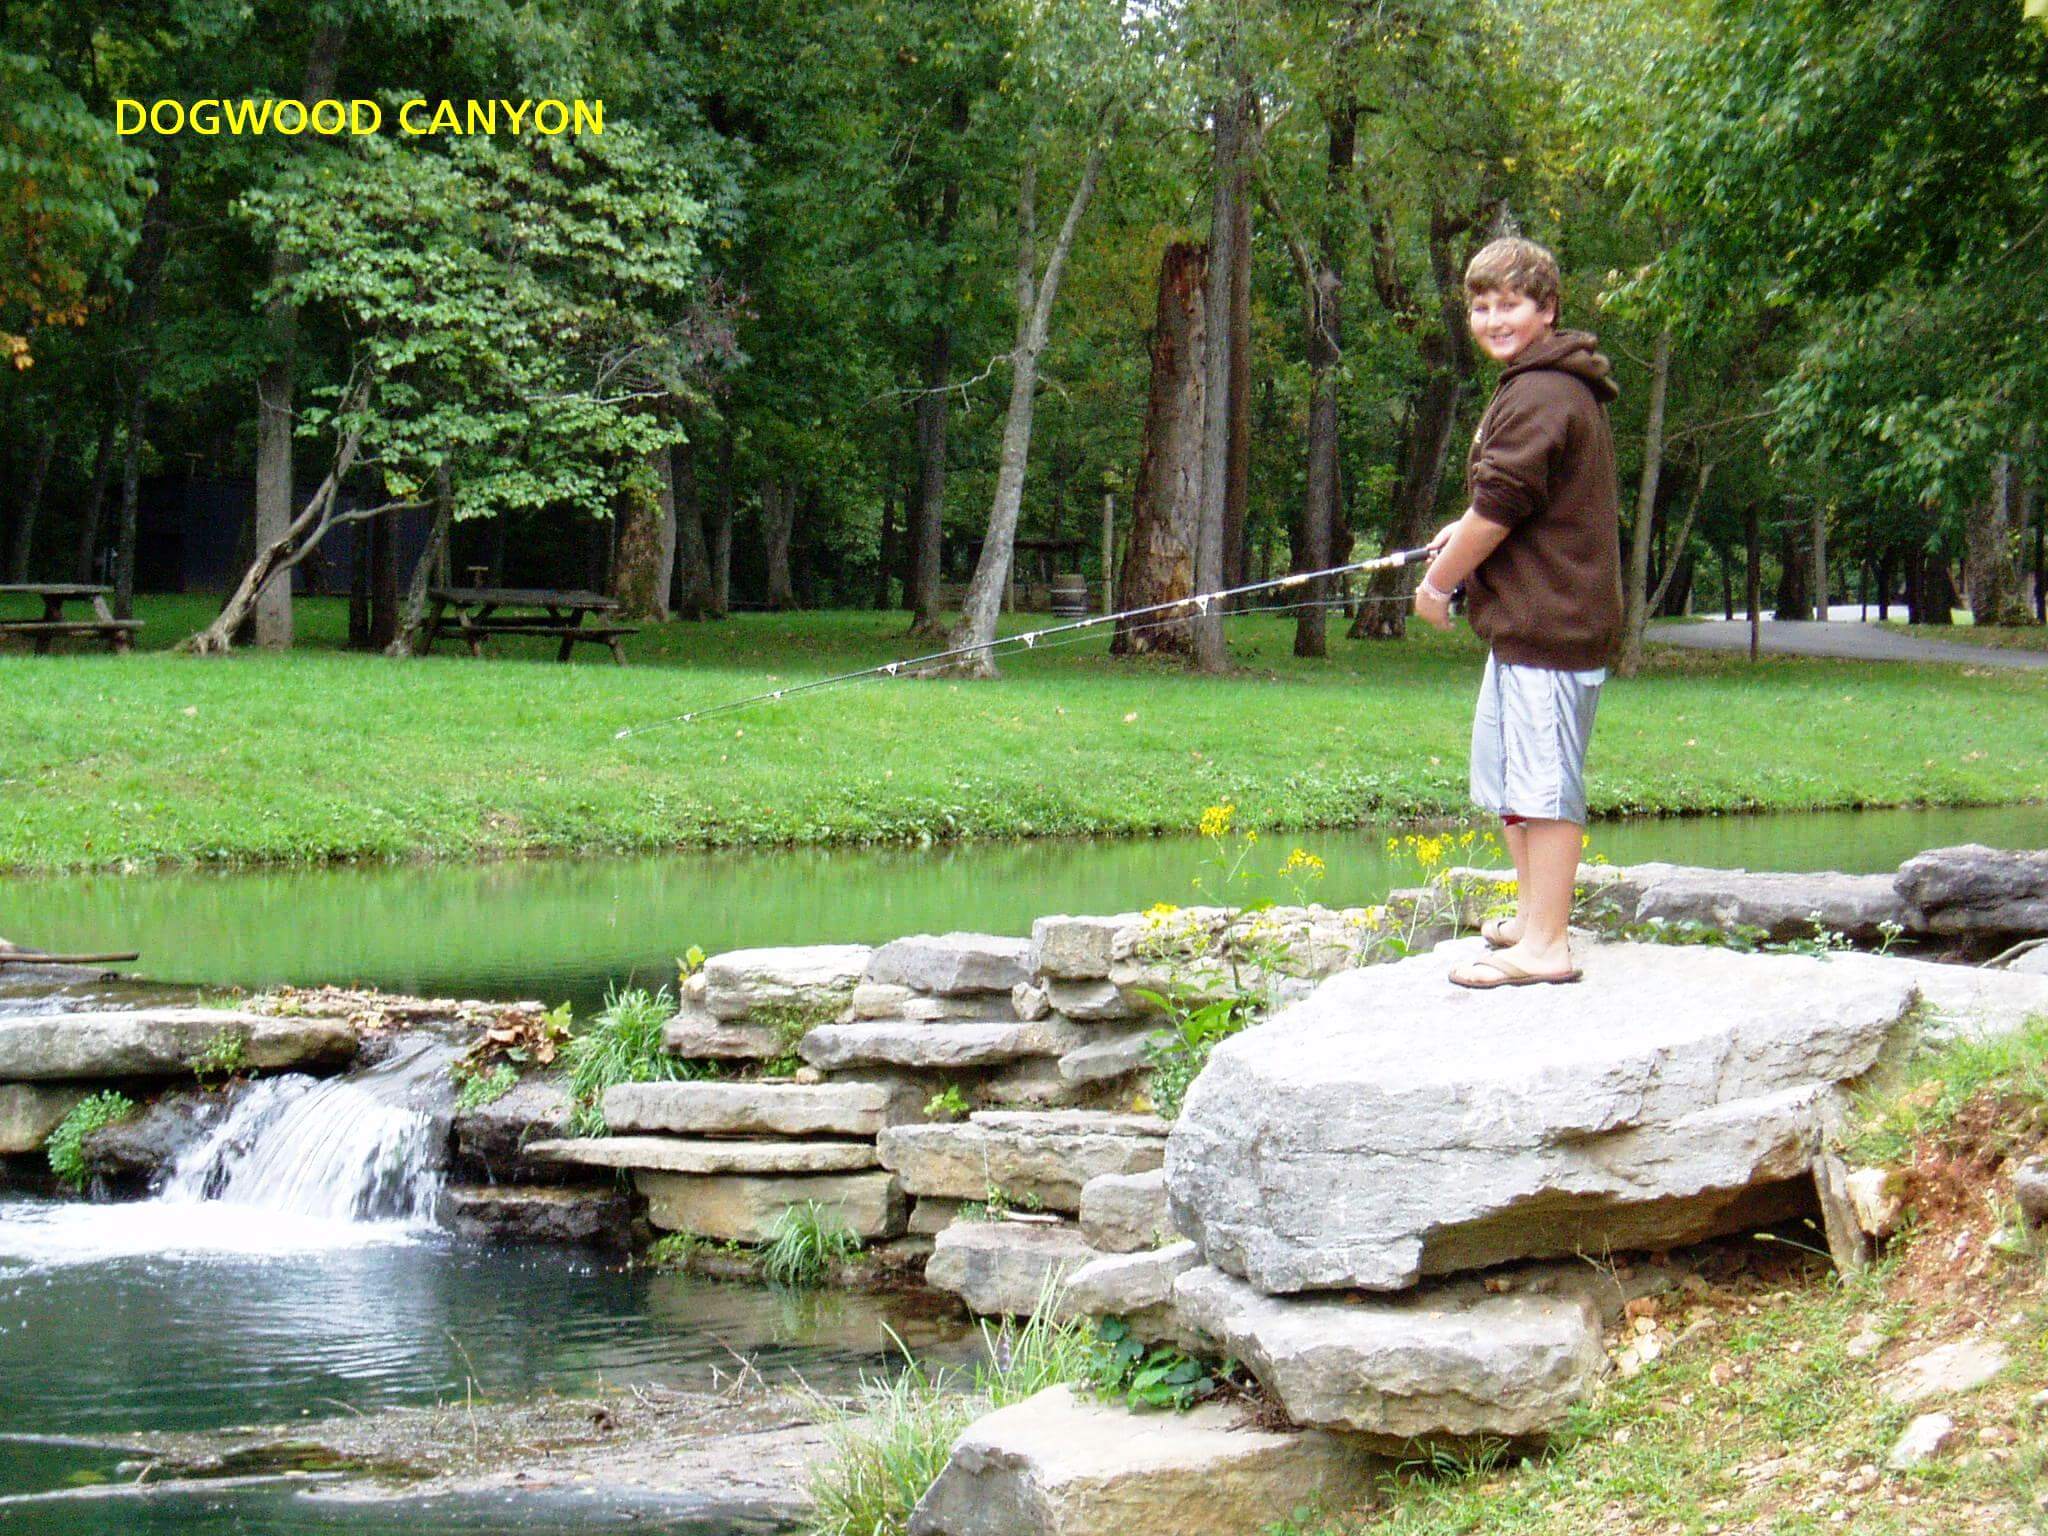 Want to Fish while in Branson? Fly, trout, bass, etc. Come Fishing